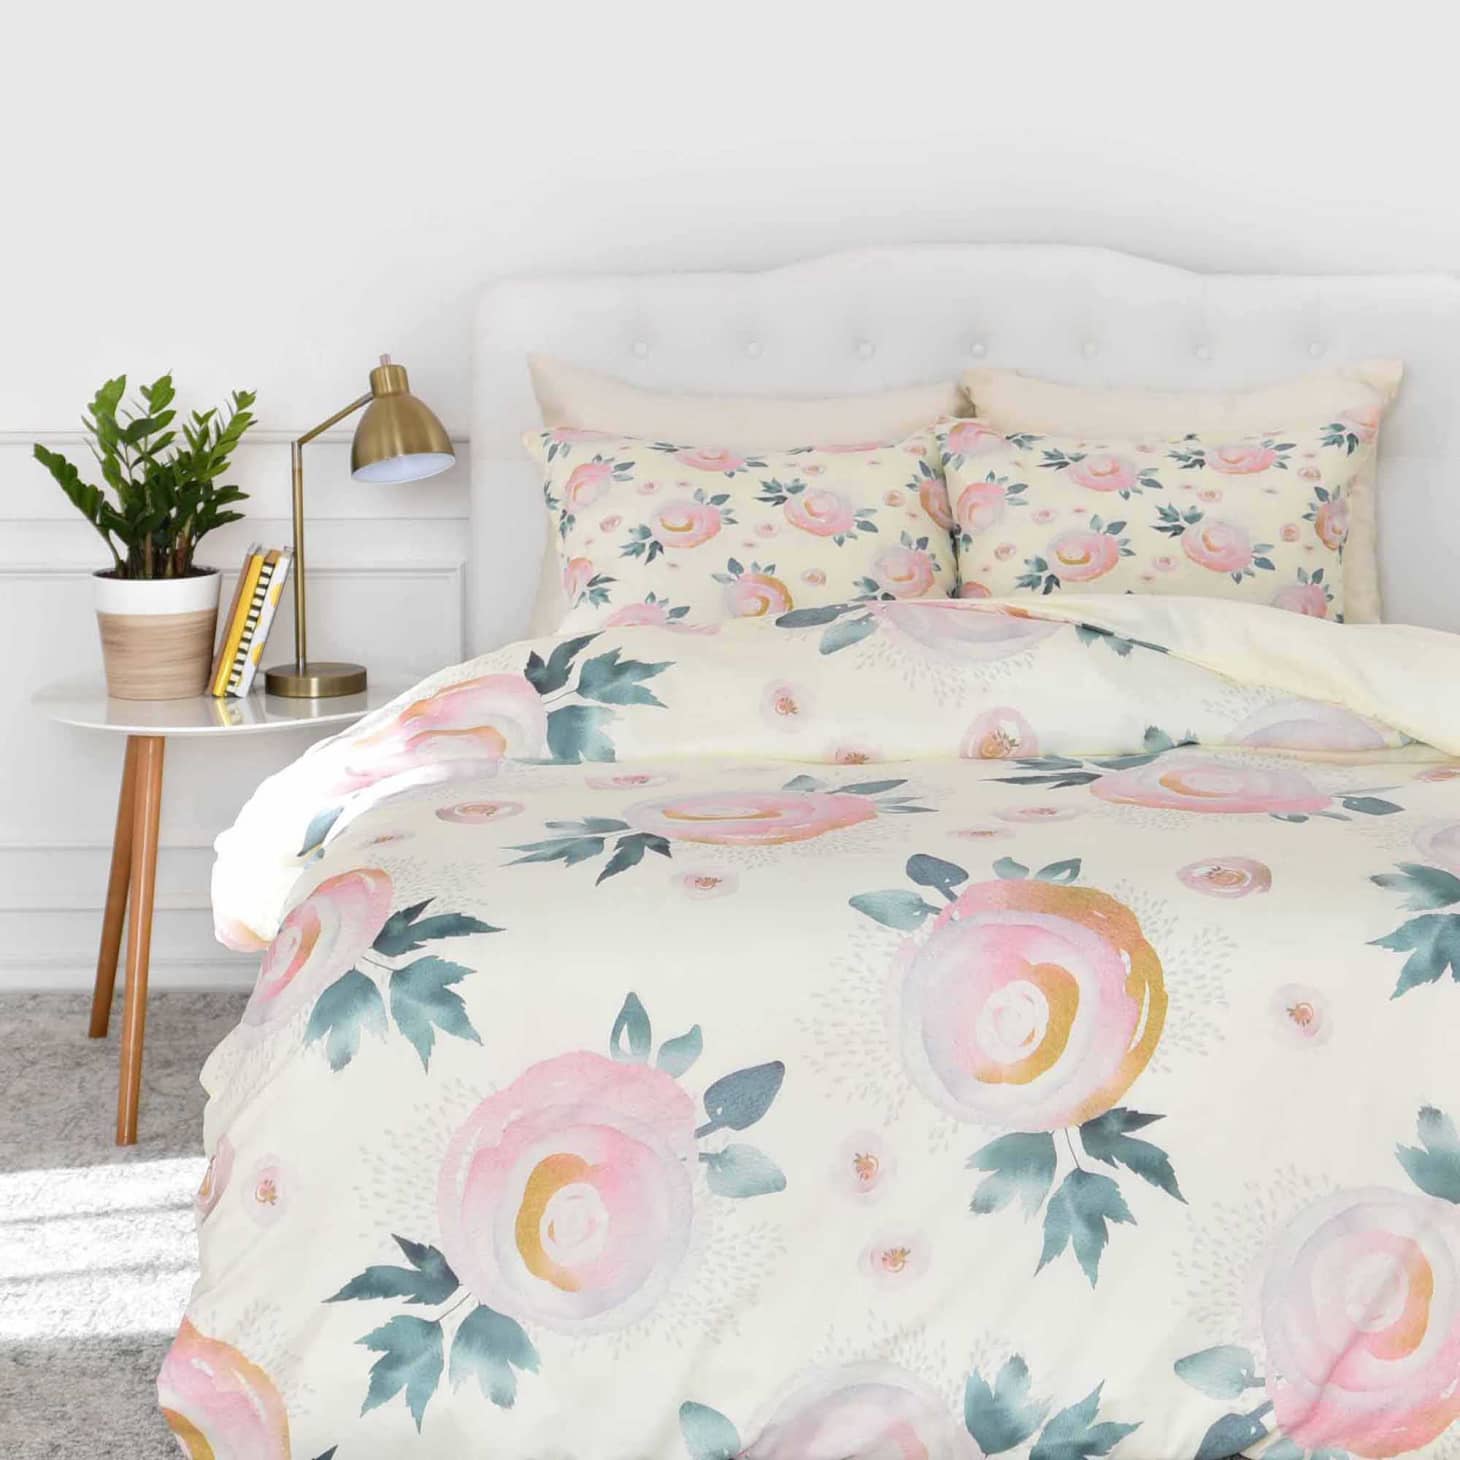 Best Places To Shop For Comforter Sets And Duvet Covers